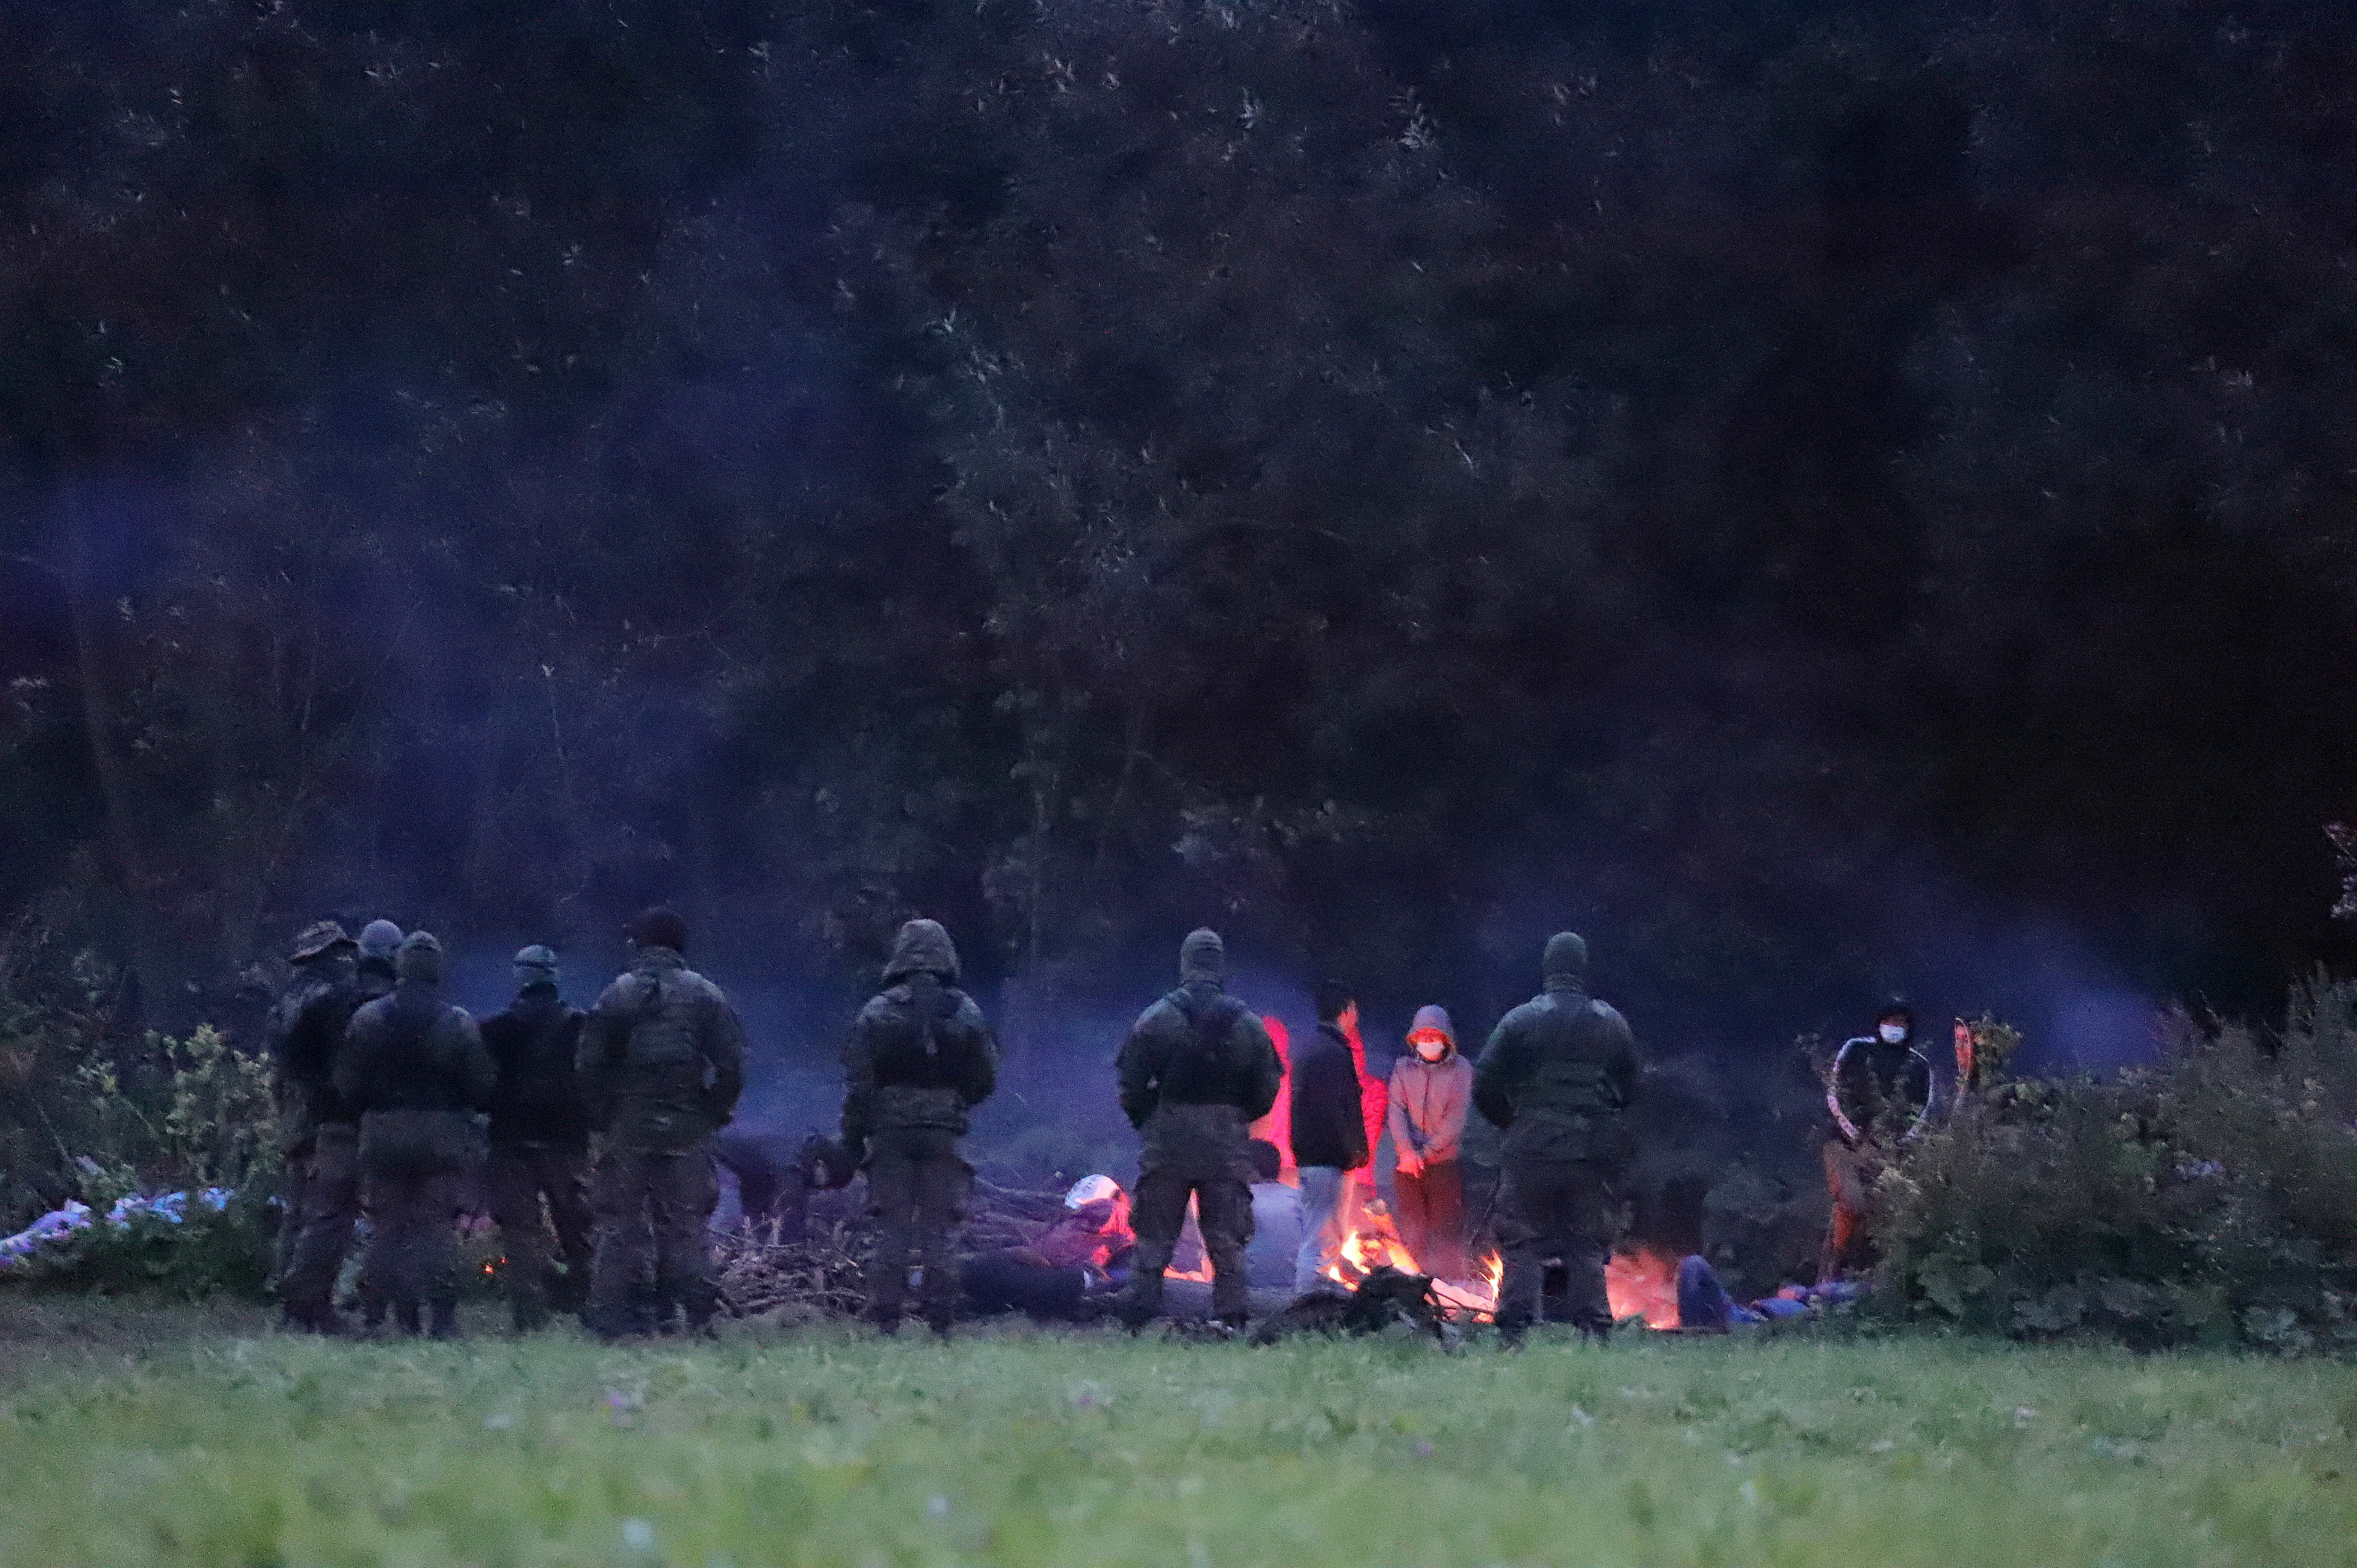 Polish border patrol officers guard a group of migrants who attempted to cross the border between Belarus and Poland near the village of Usnarz Gorny